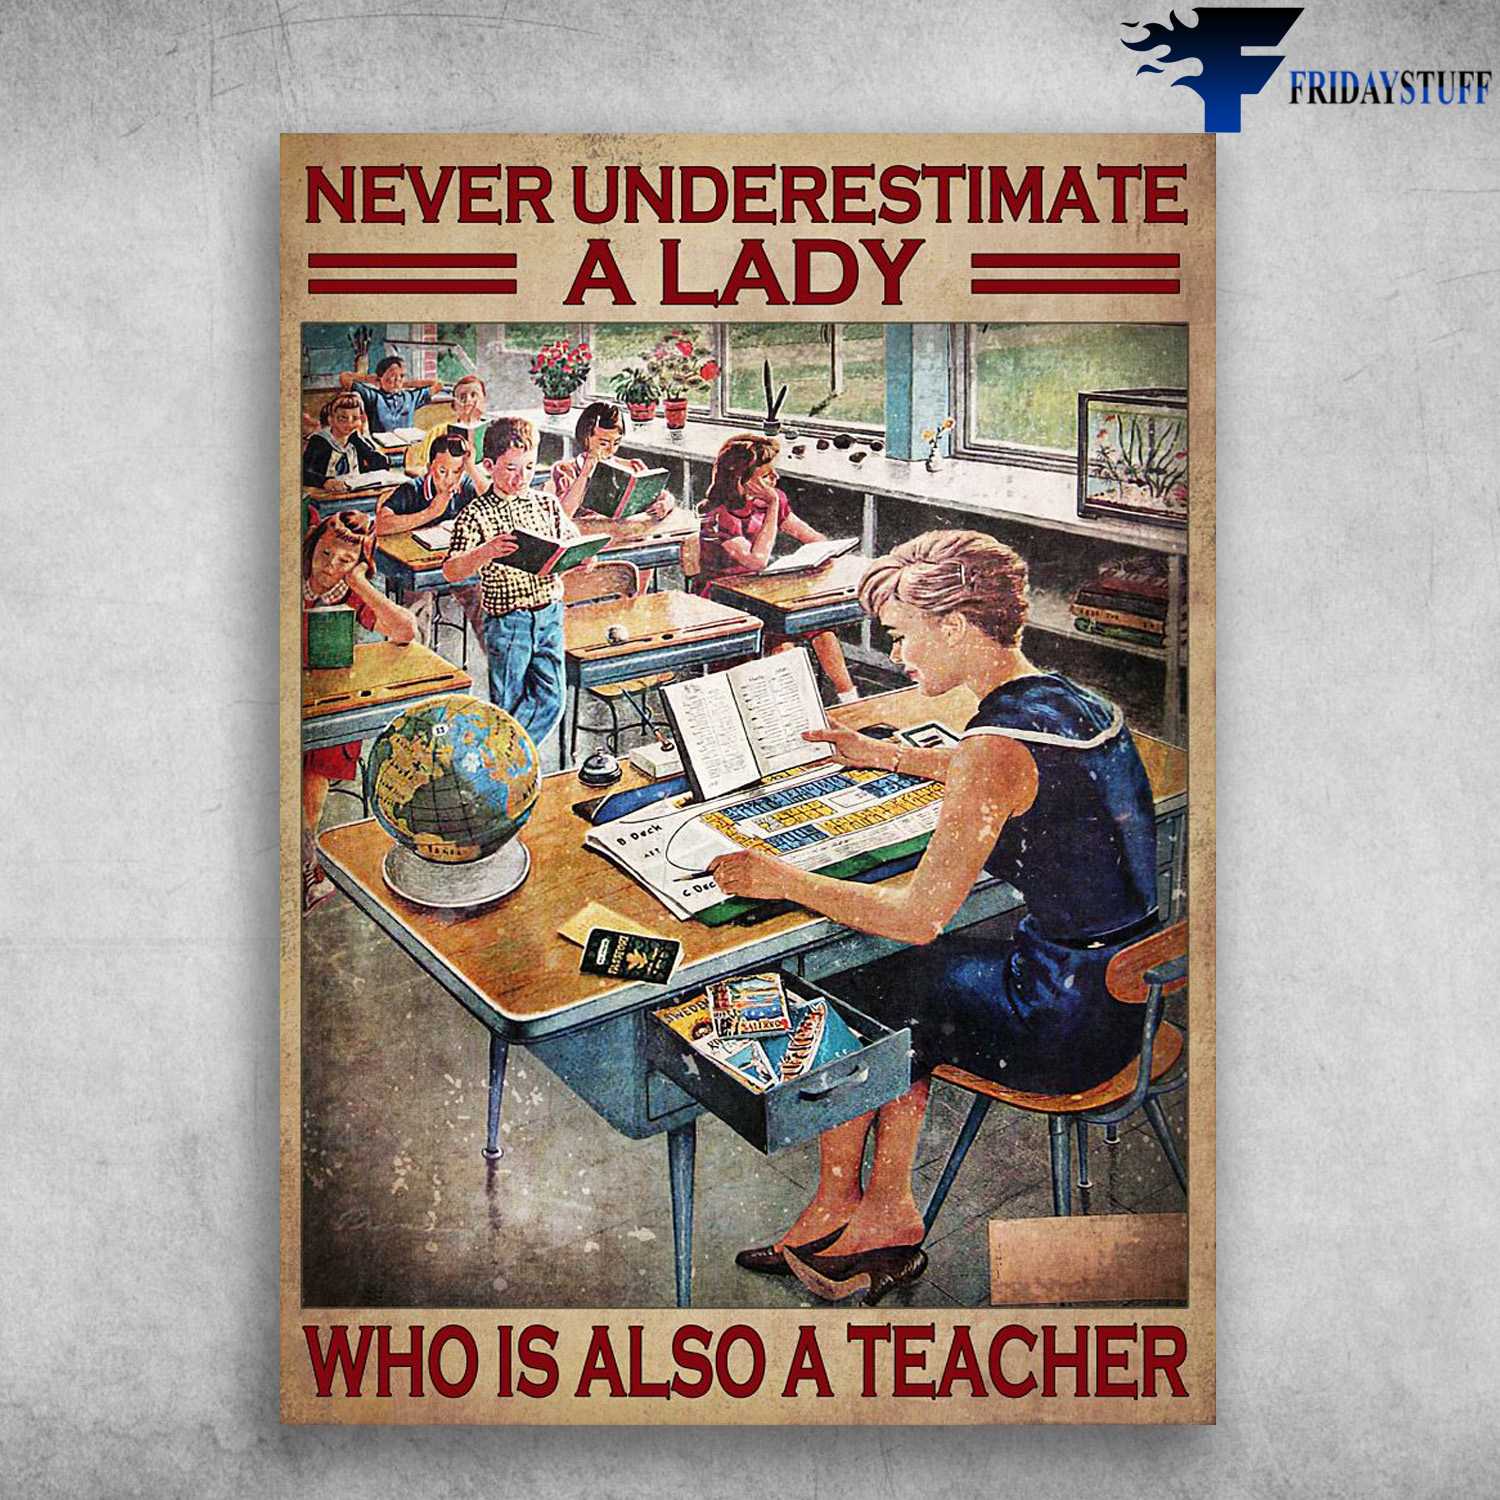 Teacher Teaching, Back To School - Never Underestimate A Lady, Who Is Also A Teacher